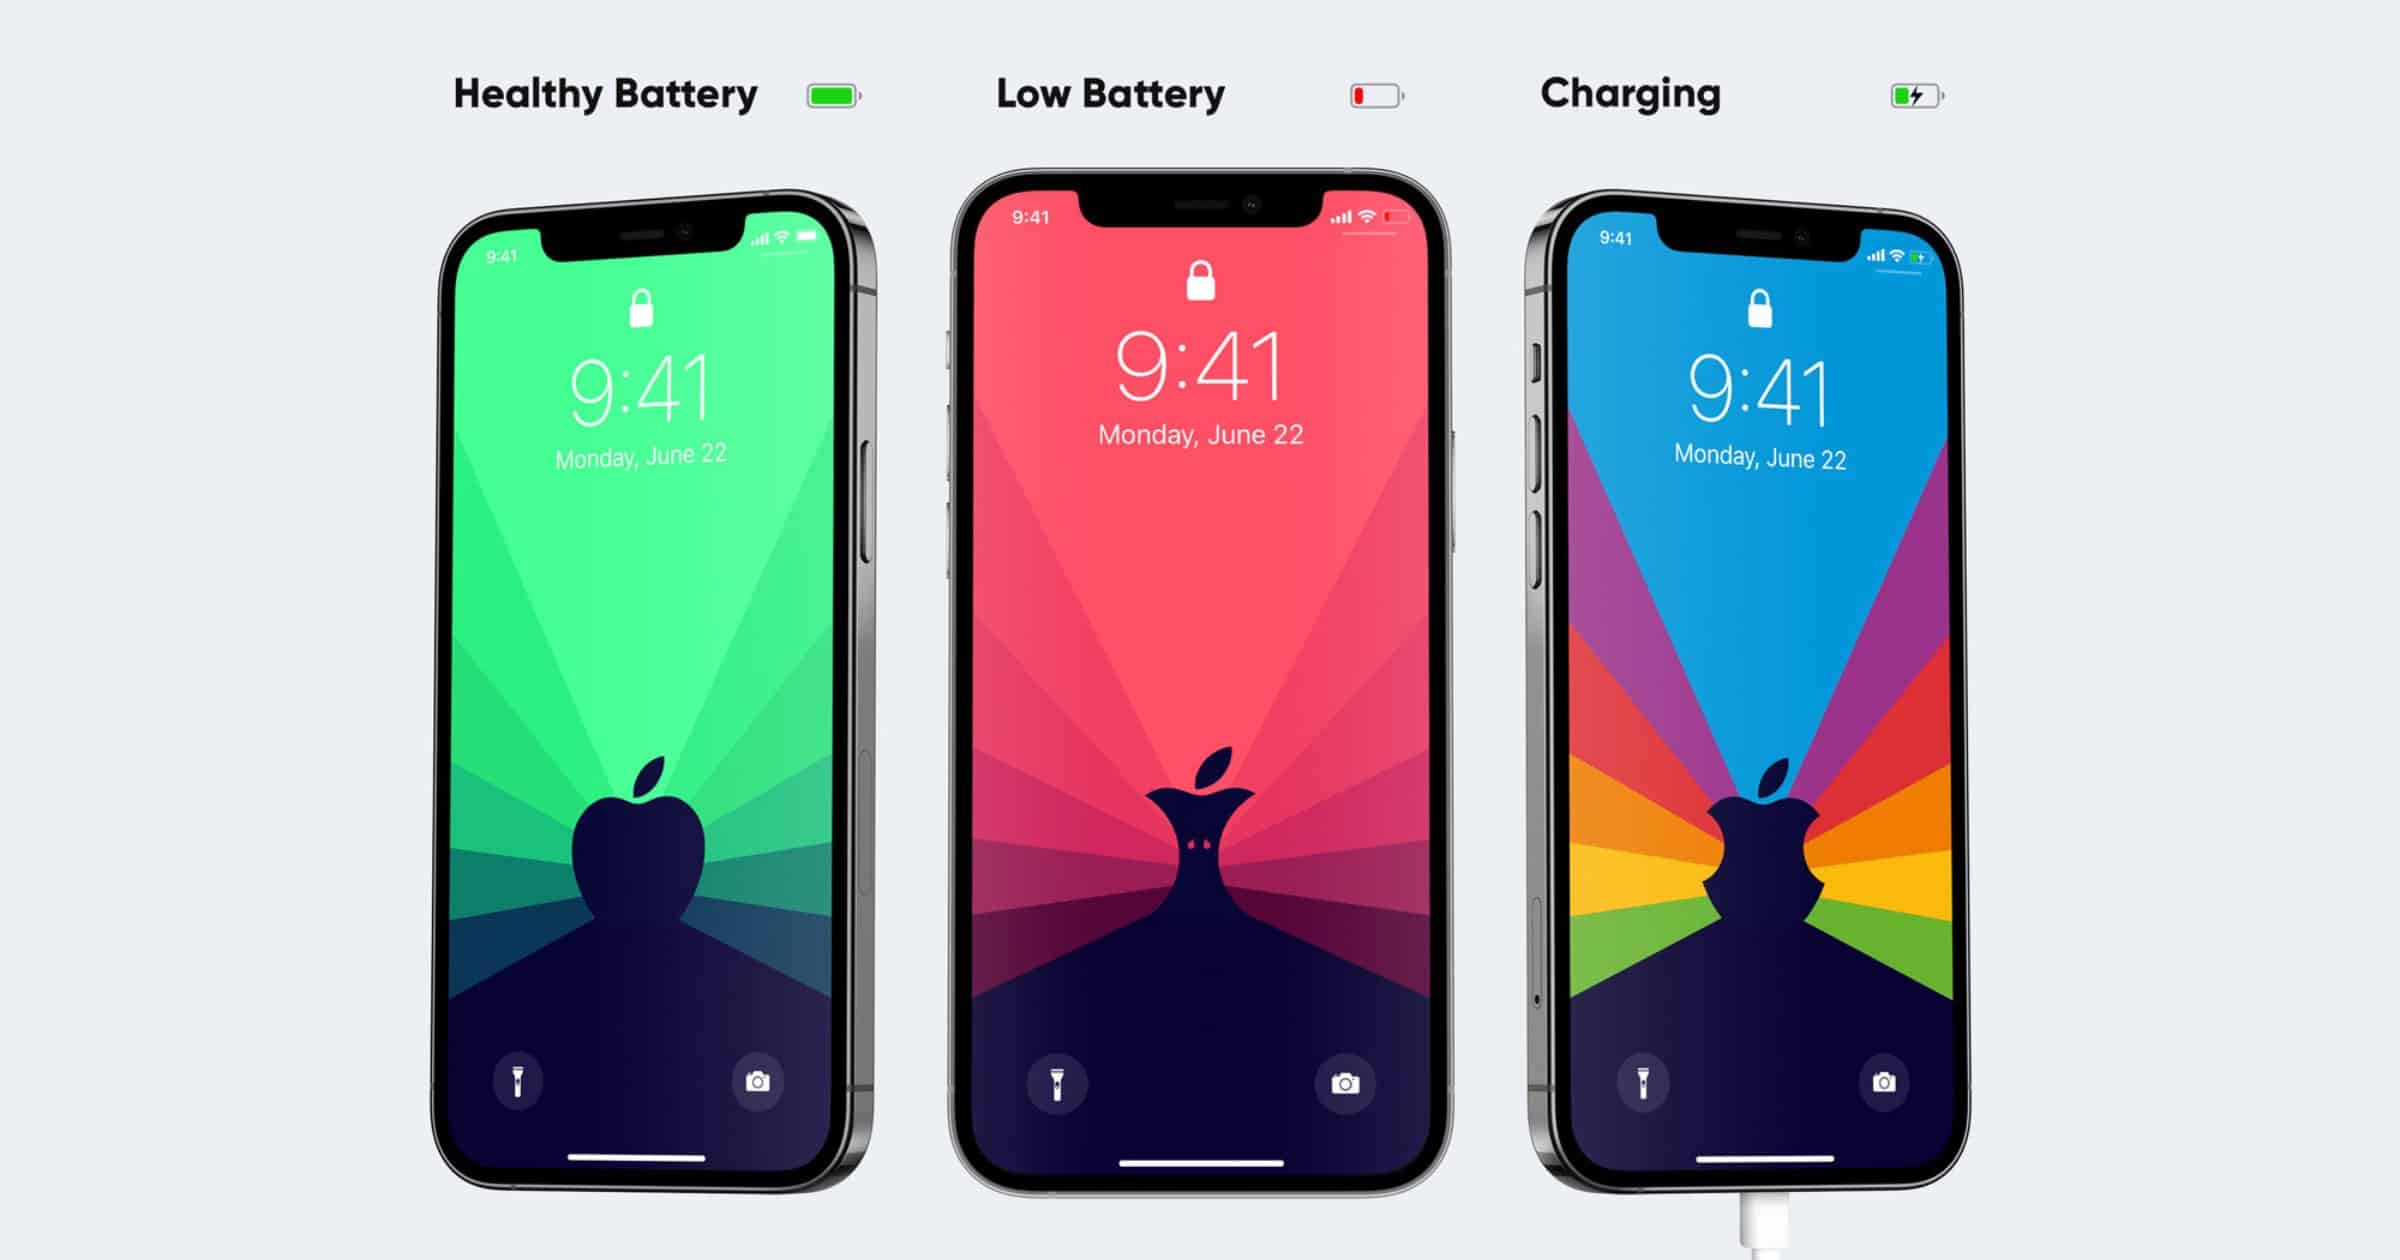 These Dynamic iOS Wallpapers Change Based on Battery Level